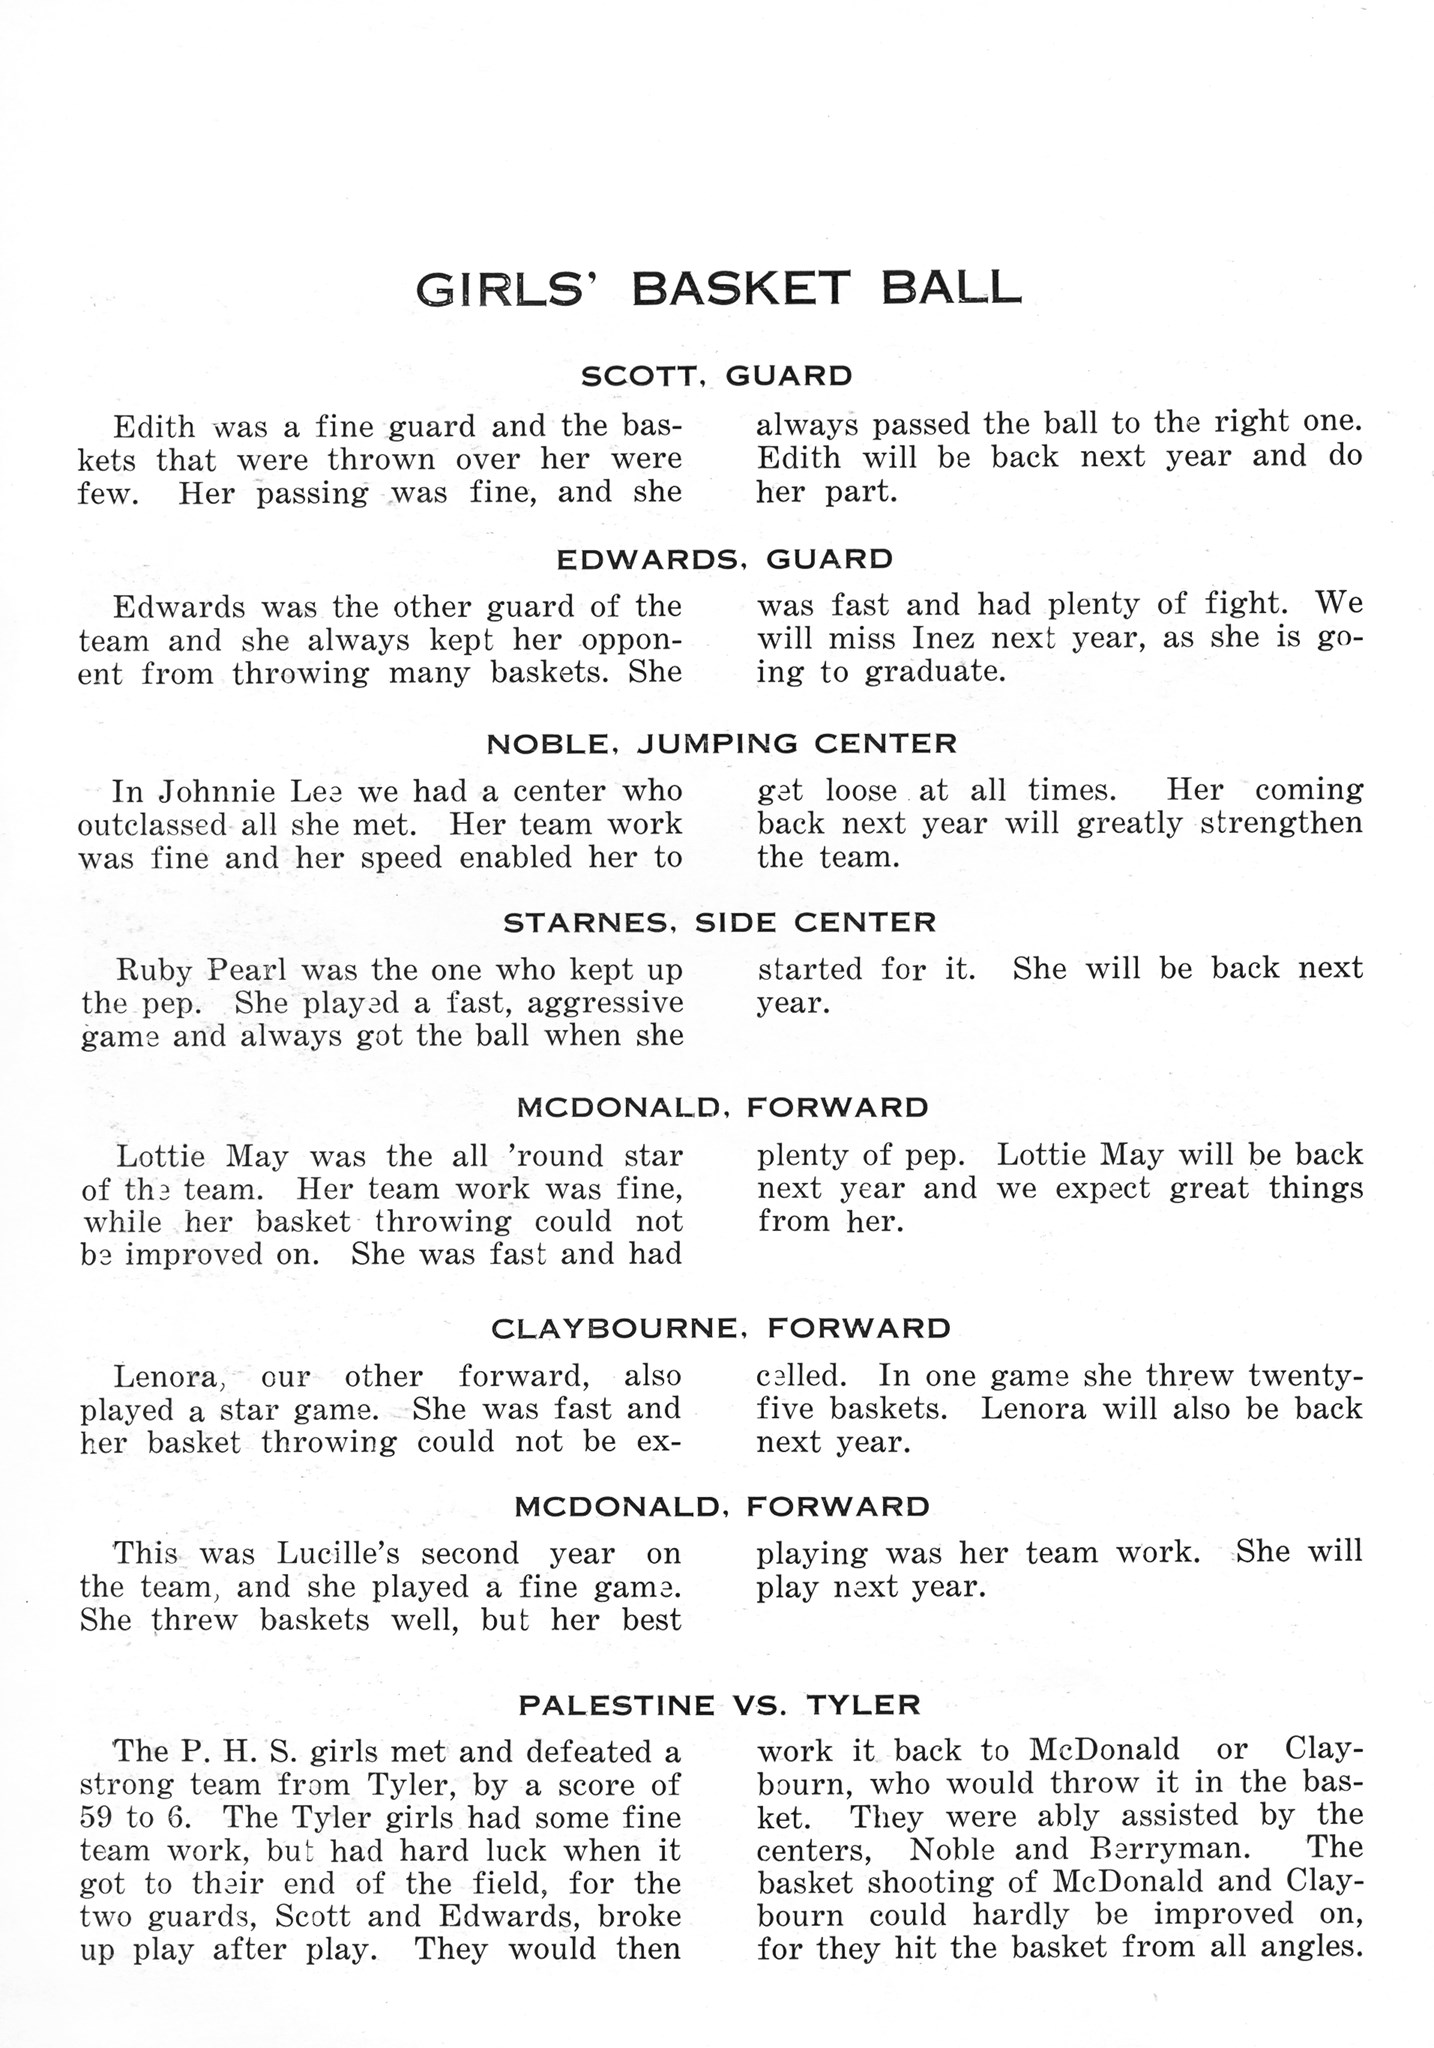 ../../../Images/Large/1919/Arclight-1919-pg0082.jpg